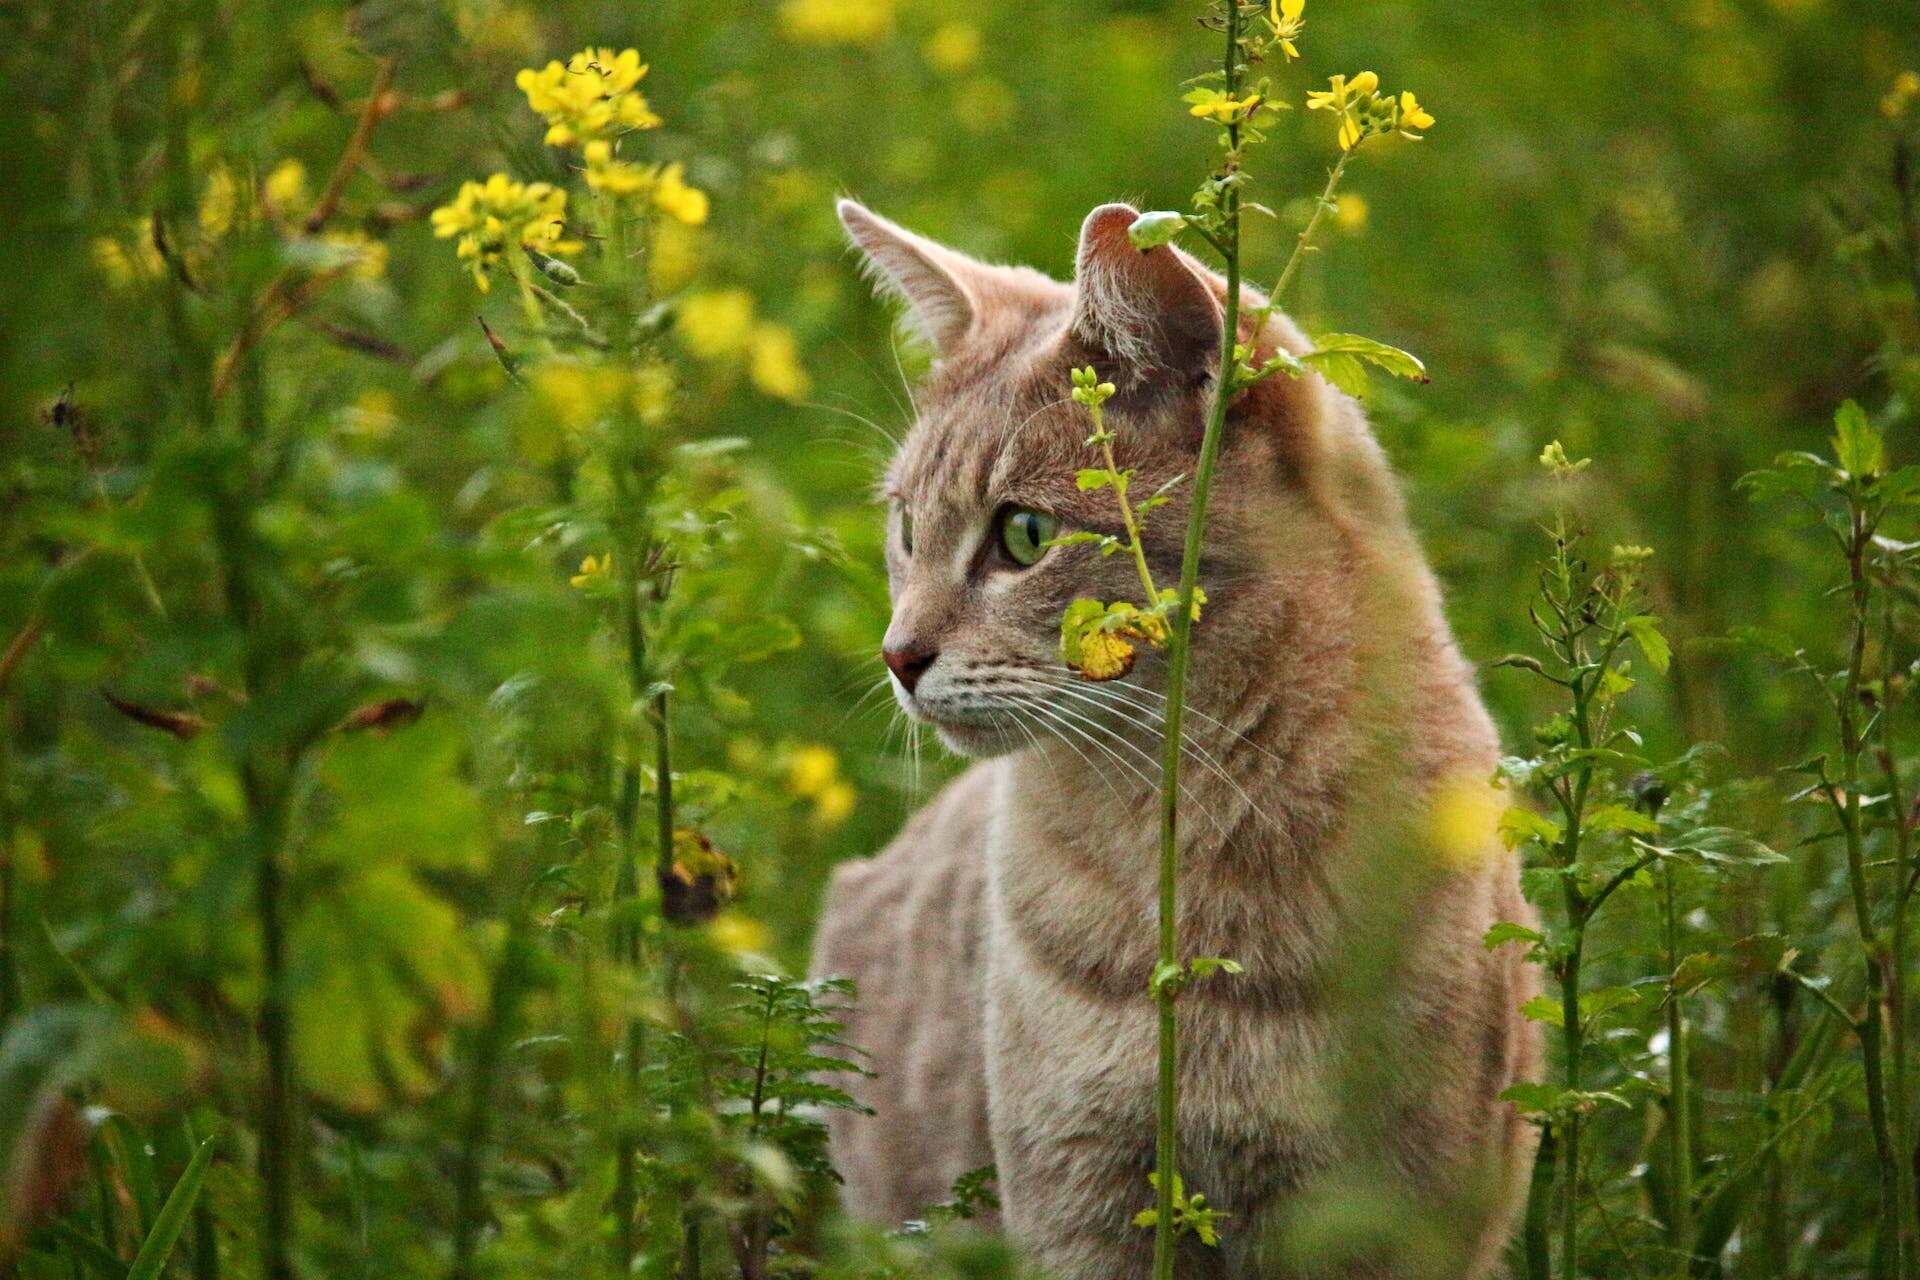 A cat standing in a grassy patch of forest, surrounded by plants